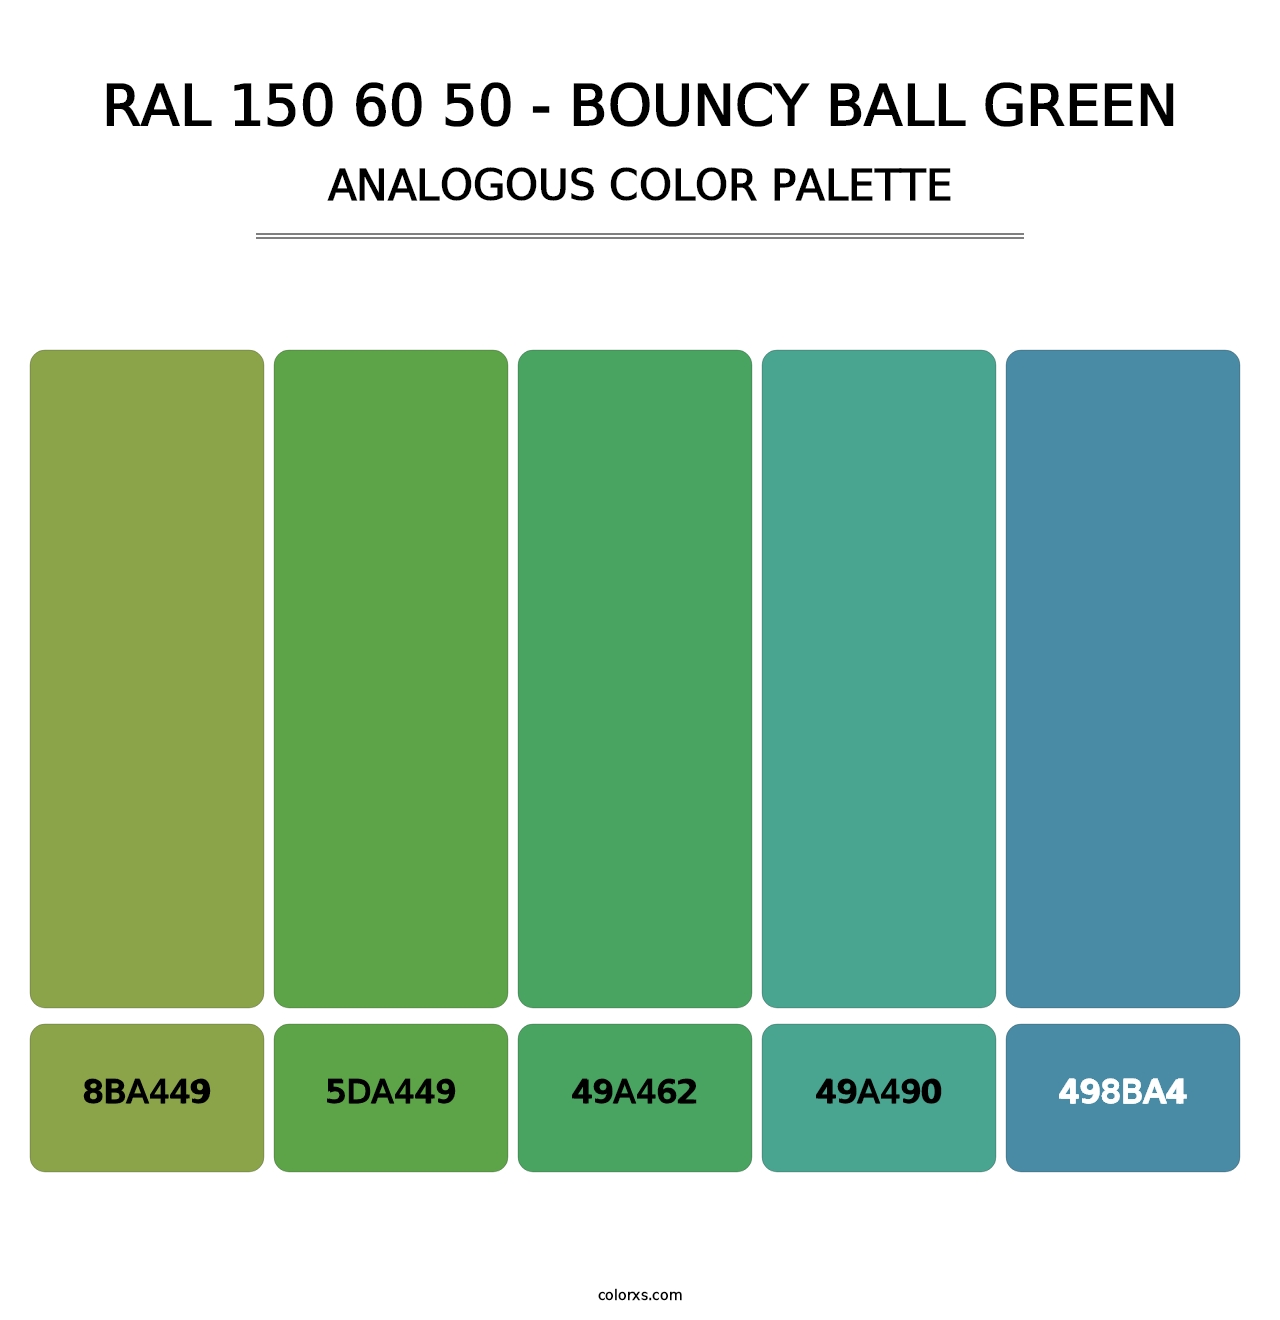 RAL 150 60 50 - Bouncy Ball Green - Analogous Color Palette